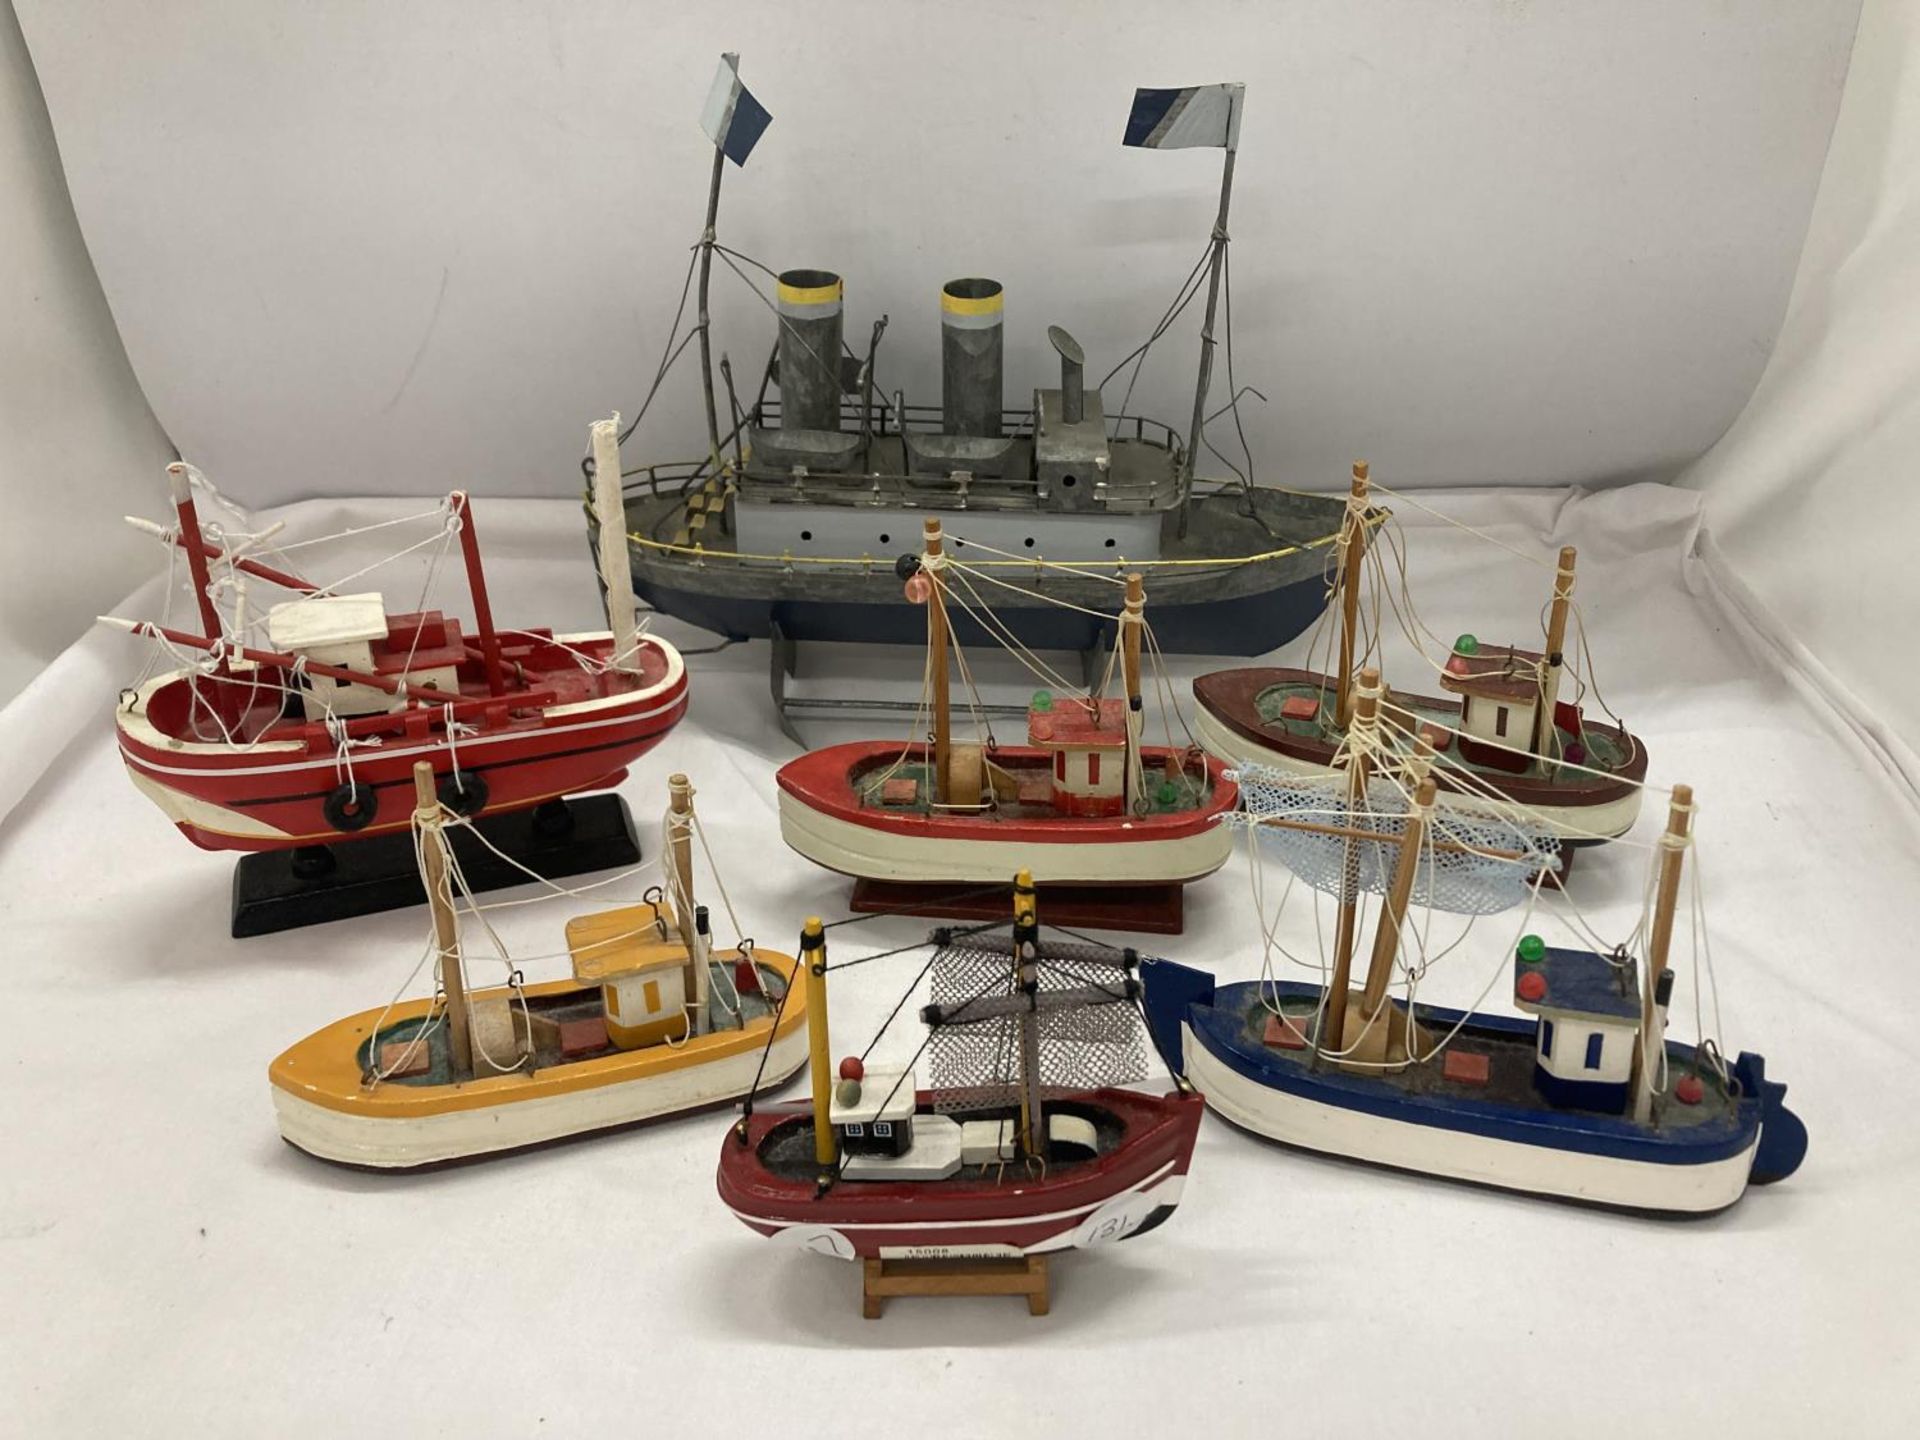 A COLLECTION OF SMALL WOODEN BOATS ON PLINTHS - 7 IN TOTAL